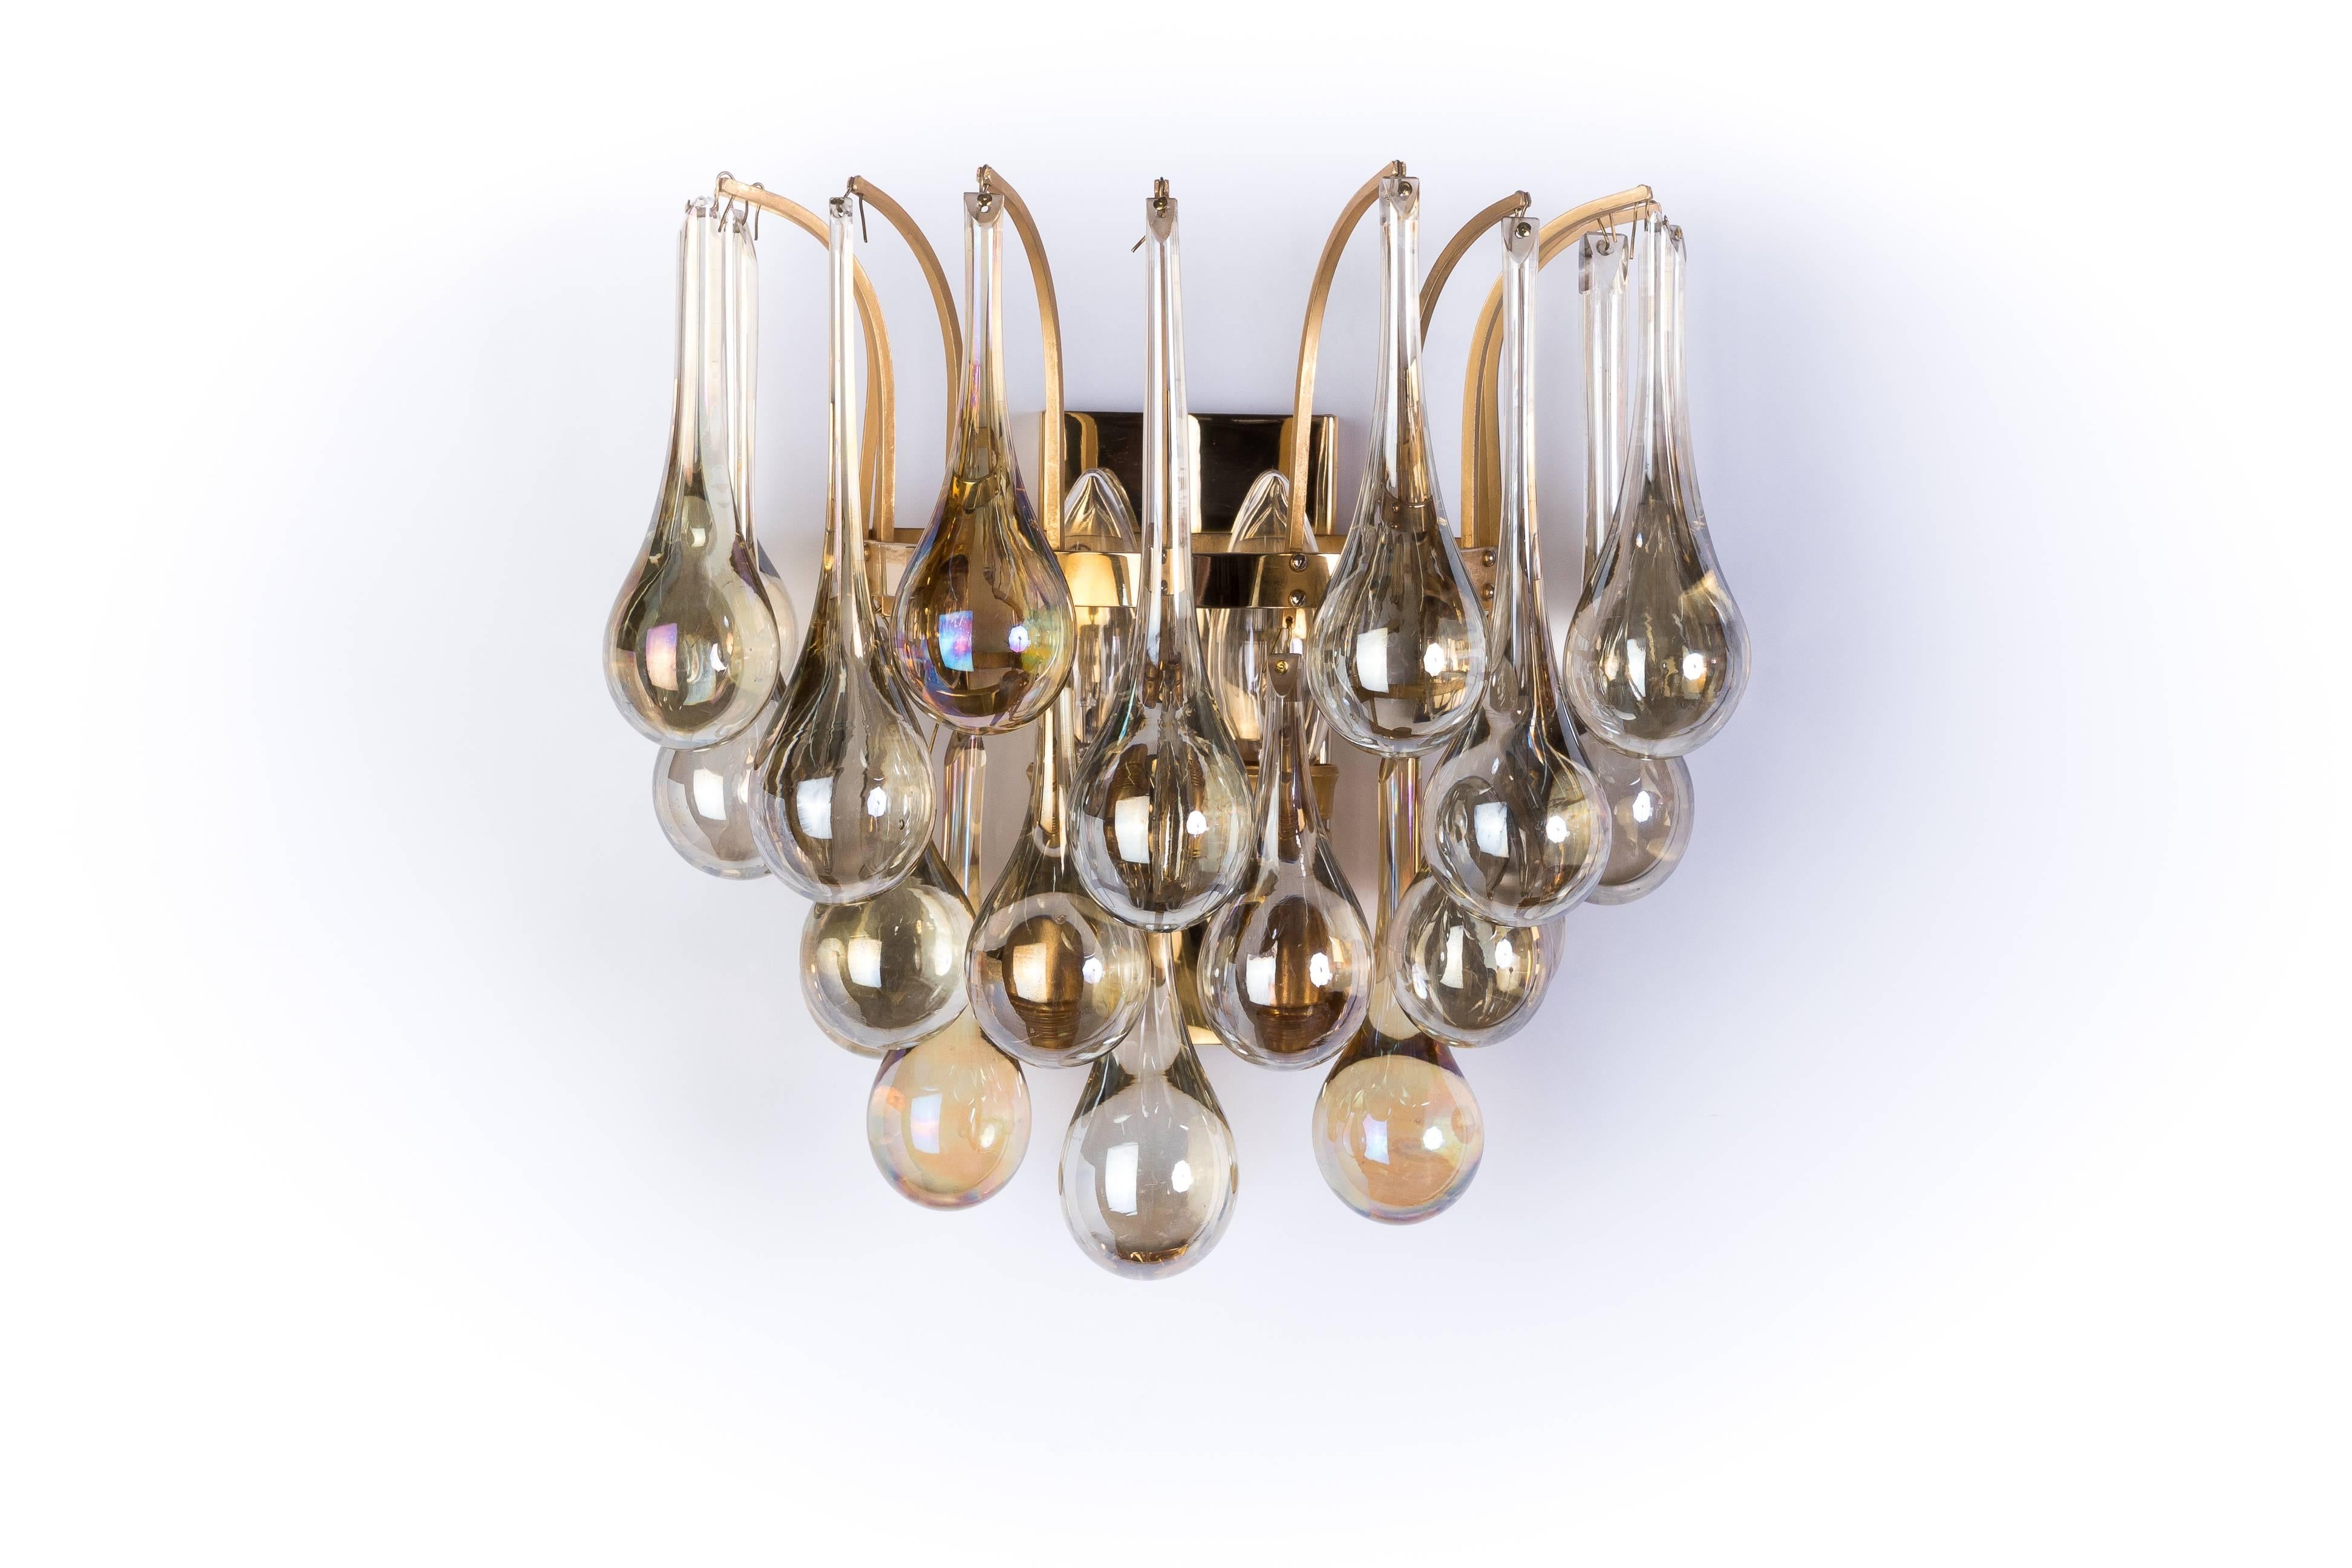 This exceptional Mid-Century Modernist pair of crystal sconces was designed by Christoph Palme. They feature a gilded metal frame layers of cascading crystal tears.

Made in Germany, circa 1970.

